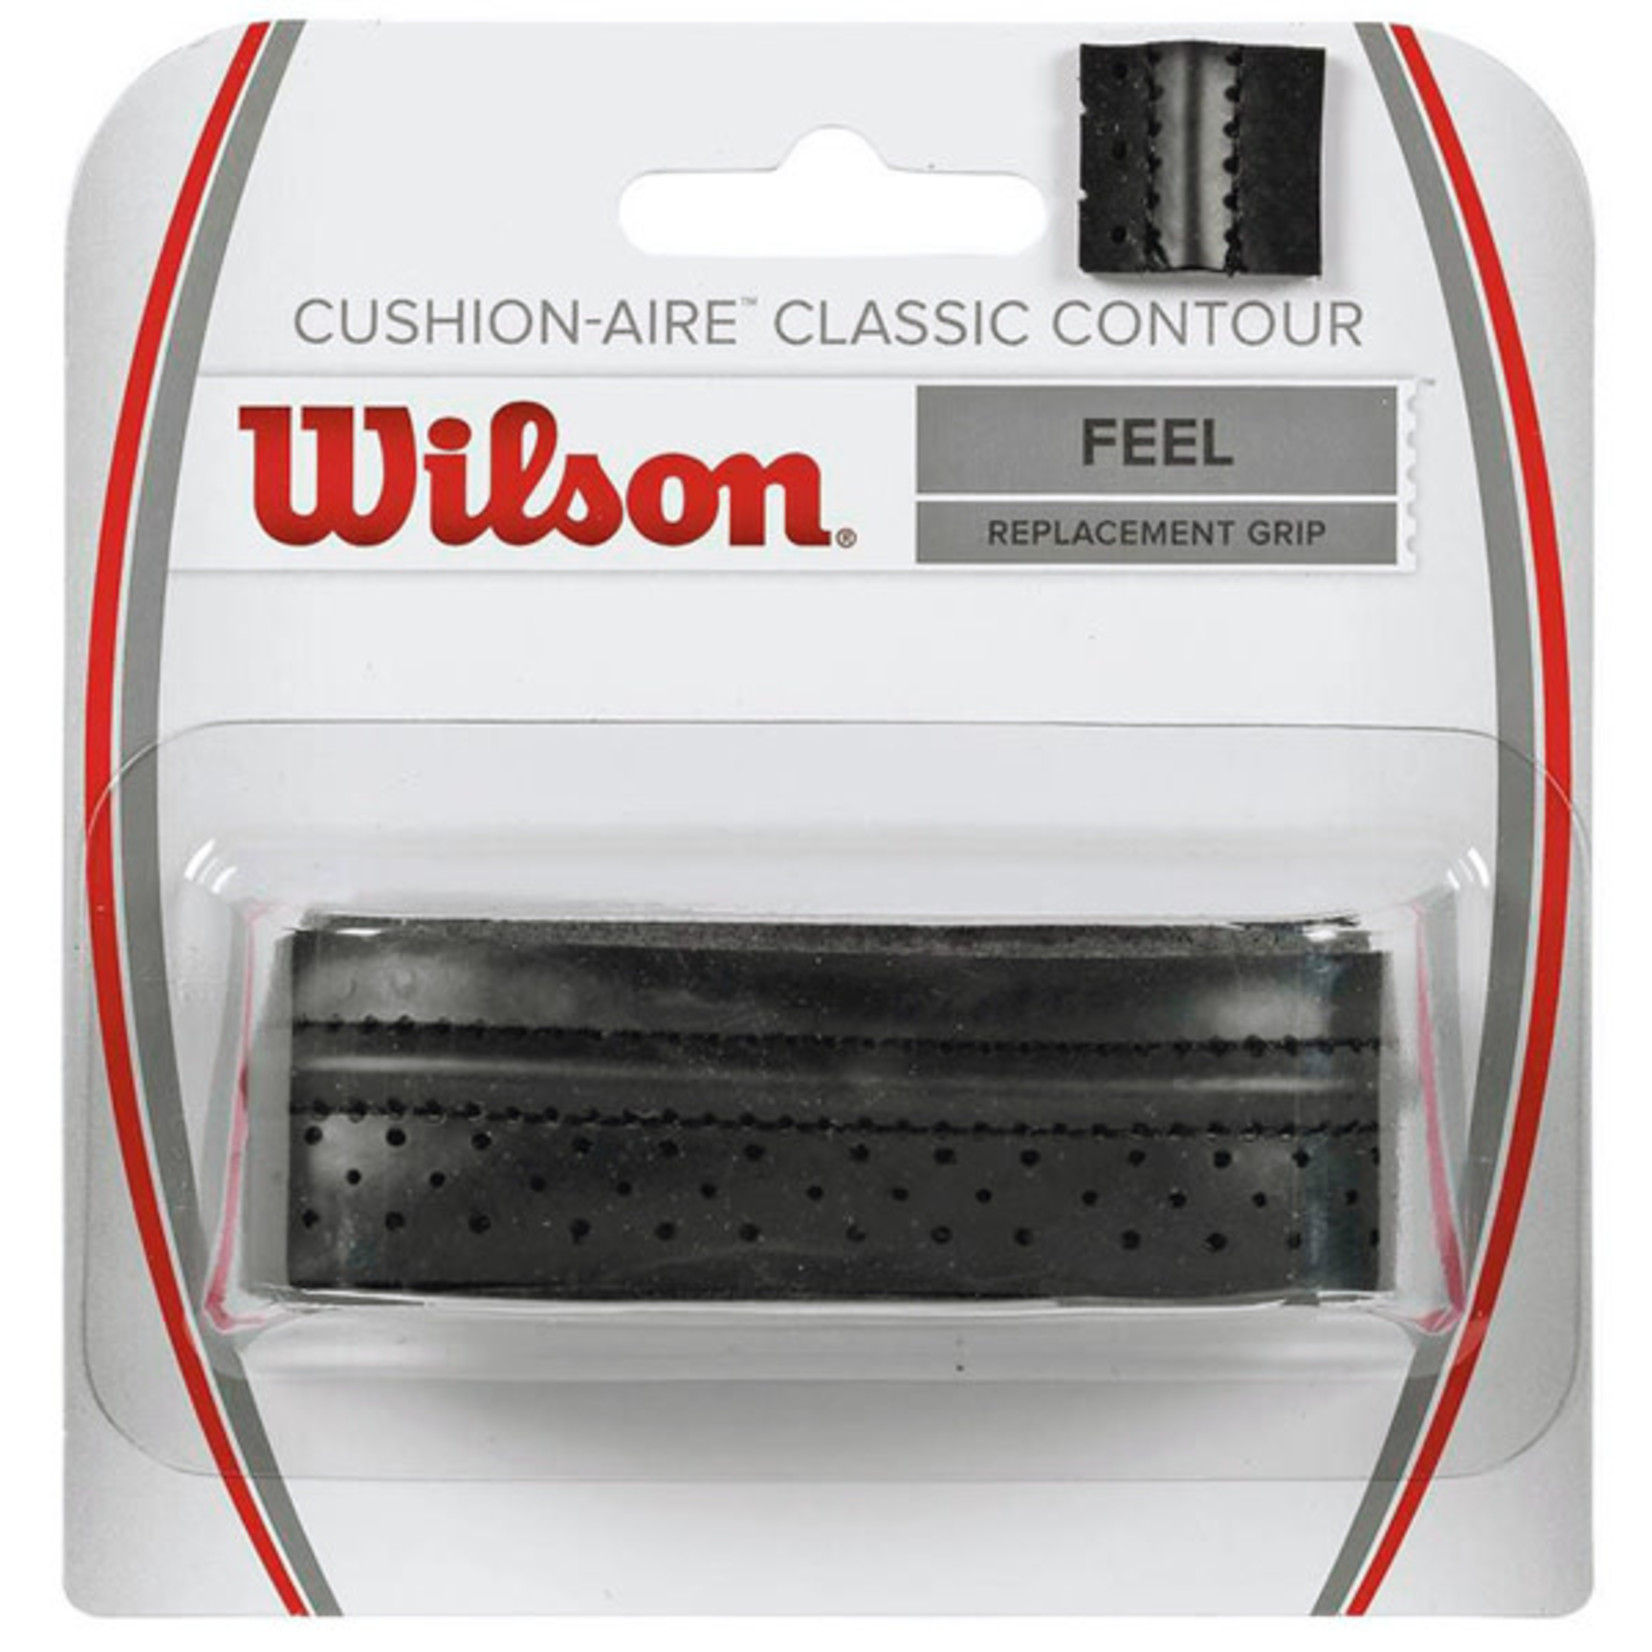 Wilson Wilson Cushion-Aire Classic Contour Replacement Grip